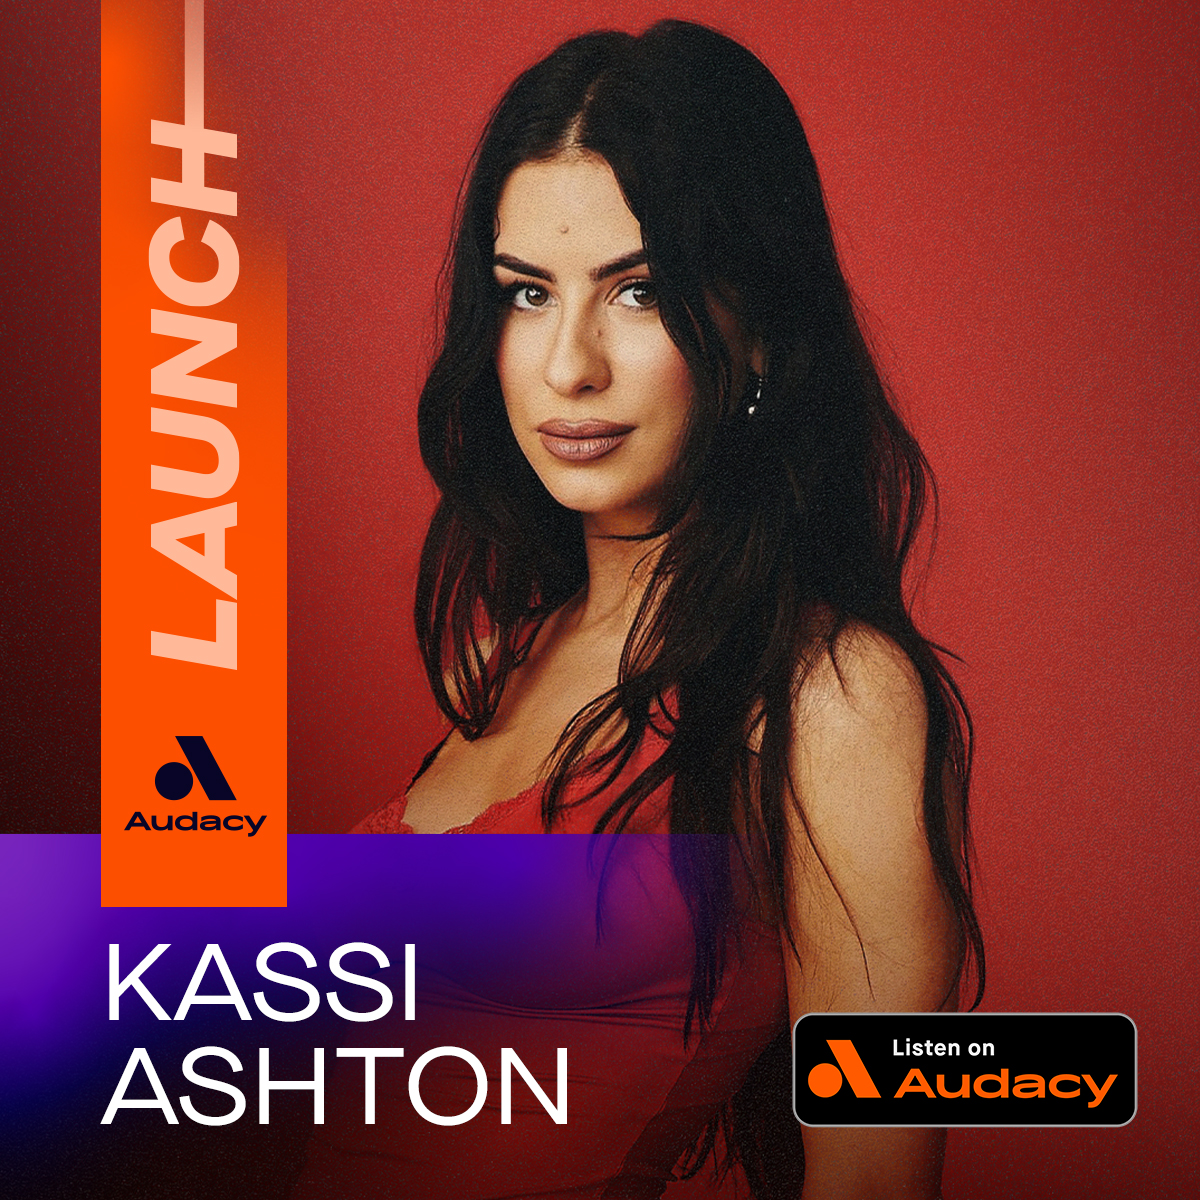 #AudacyLAUNCH is BACK and we're launching @KassiAshton across our Country stations 🚀 Get to know #KassiAshton + follow along her musical journey on Audacy: auda.cy/LAUNCHKassi